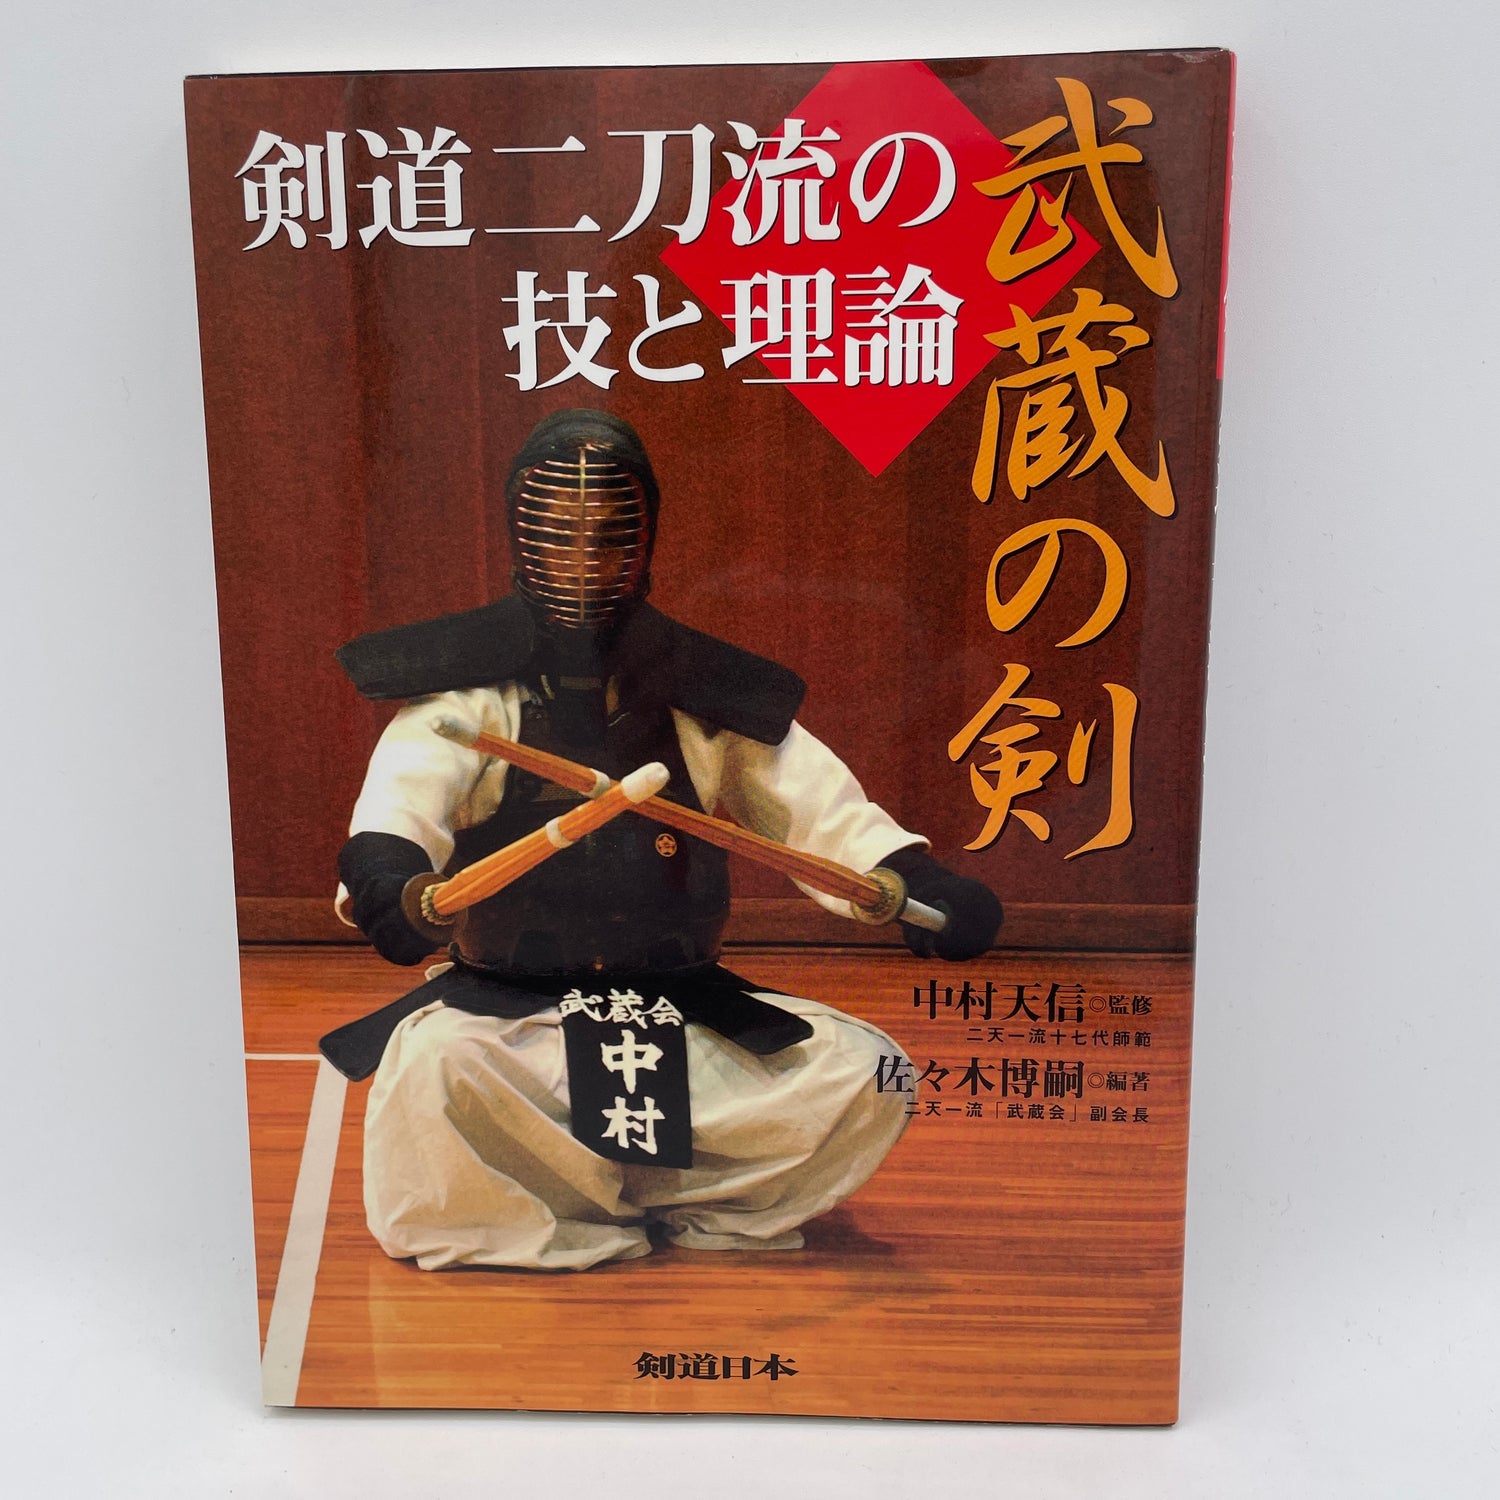 Musashi's Sword: Techniques & Theory of Two-Sword Kendo Book by Hirotsugu Sasaki (Preowned)